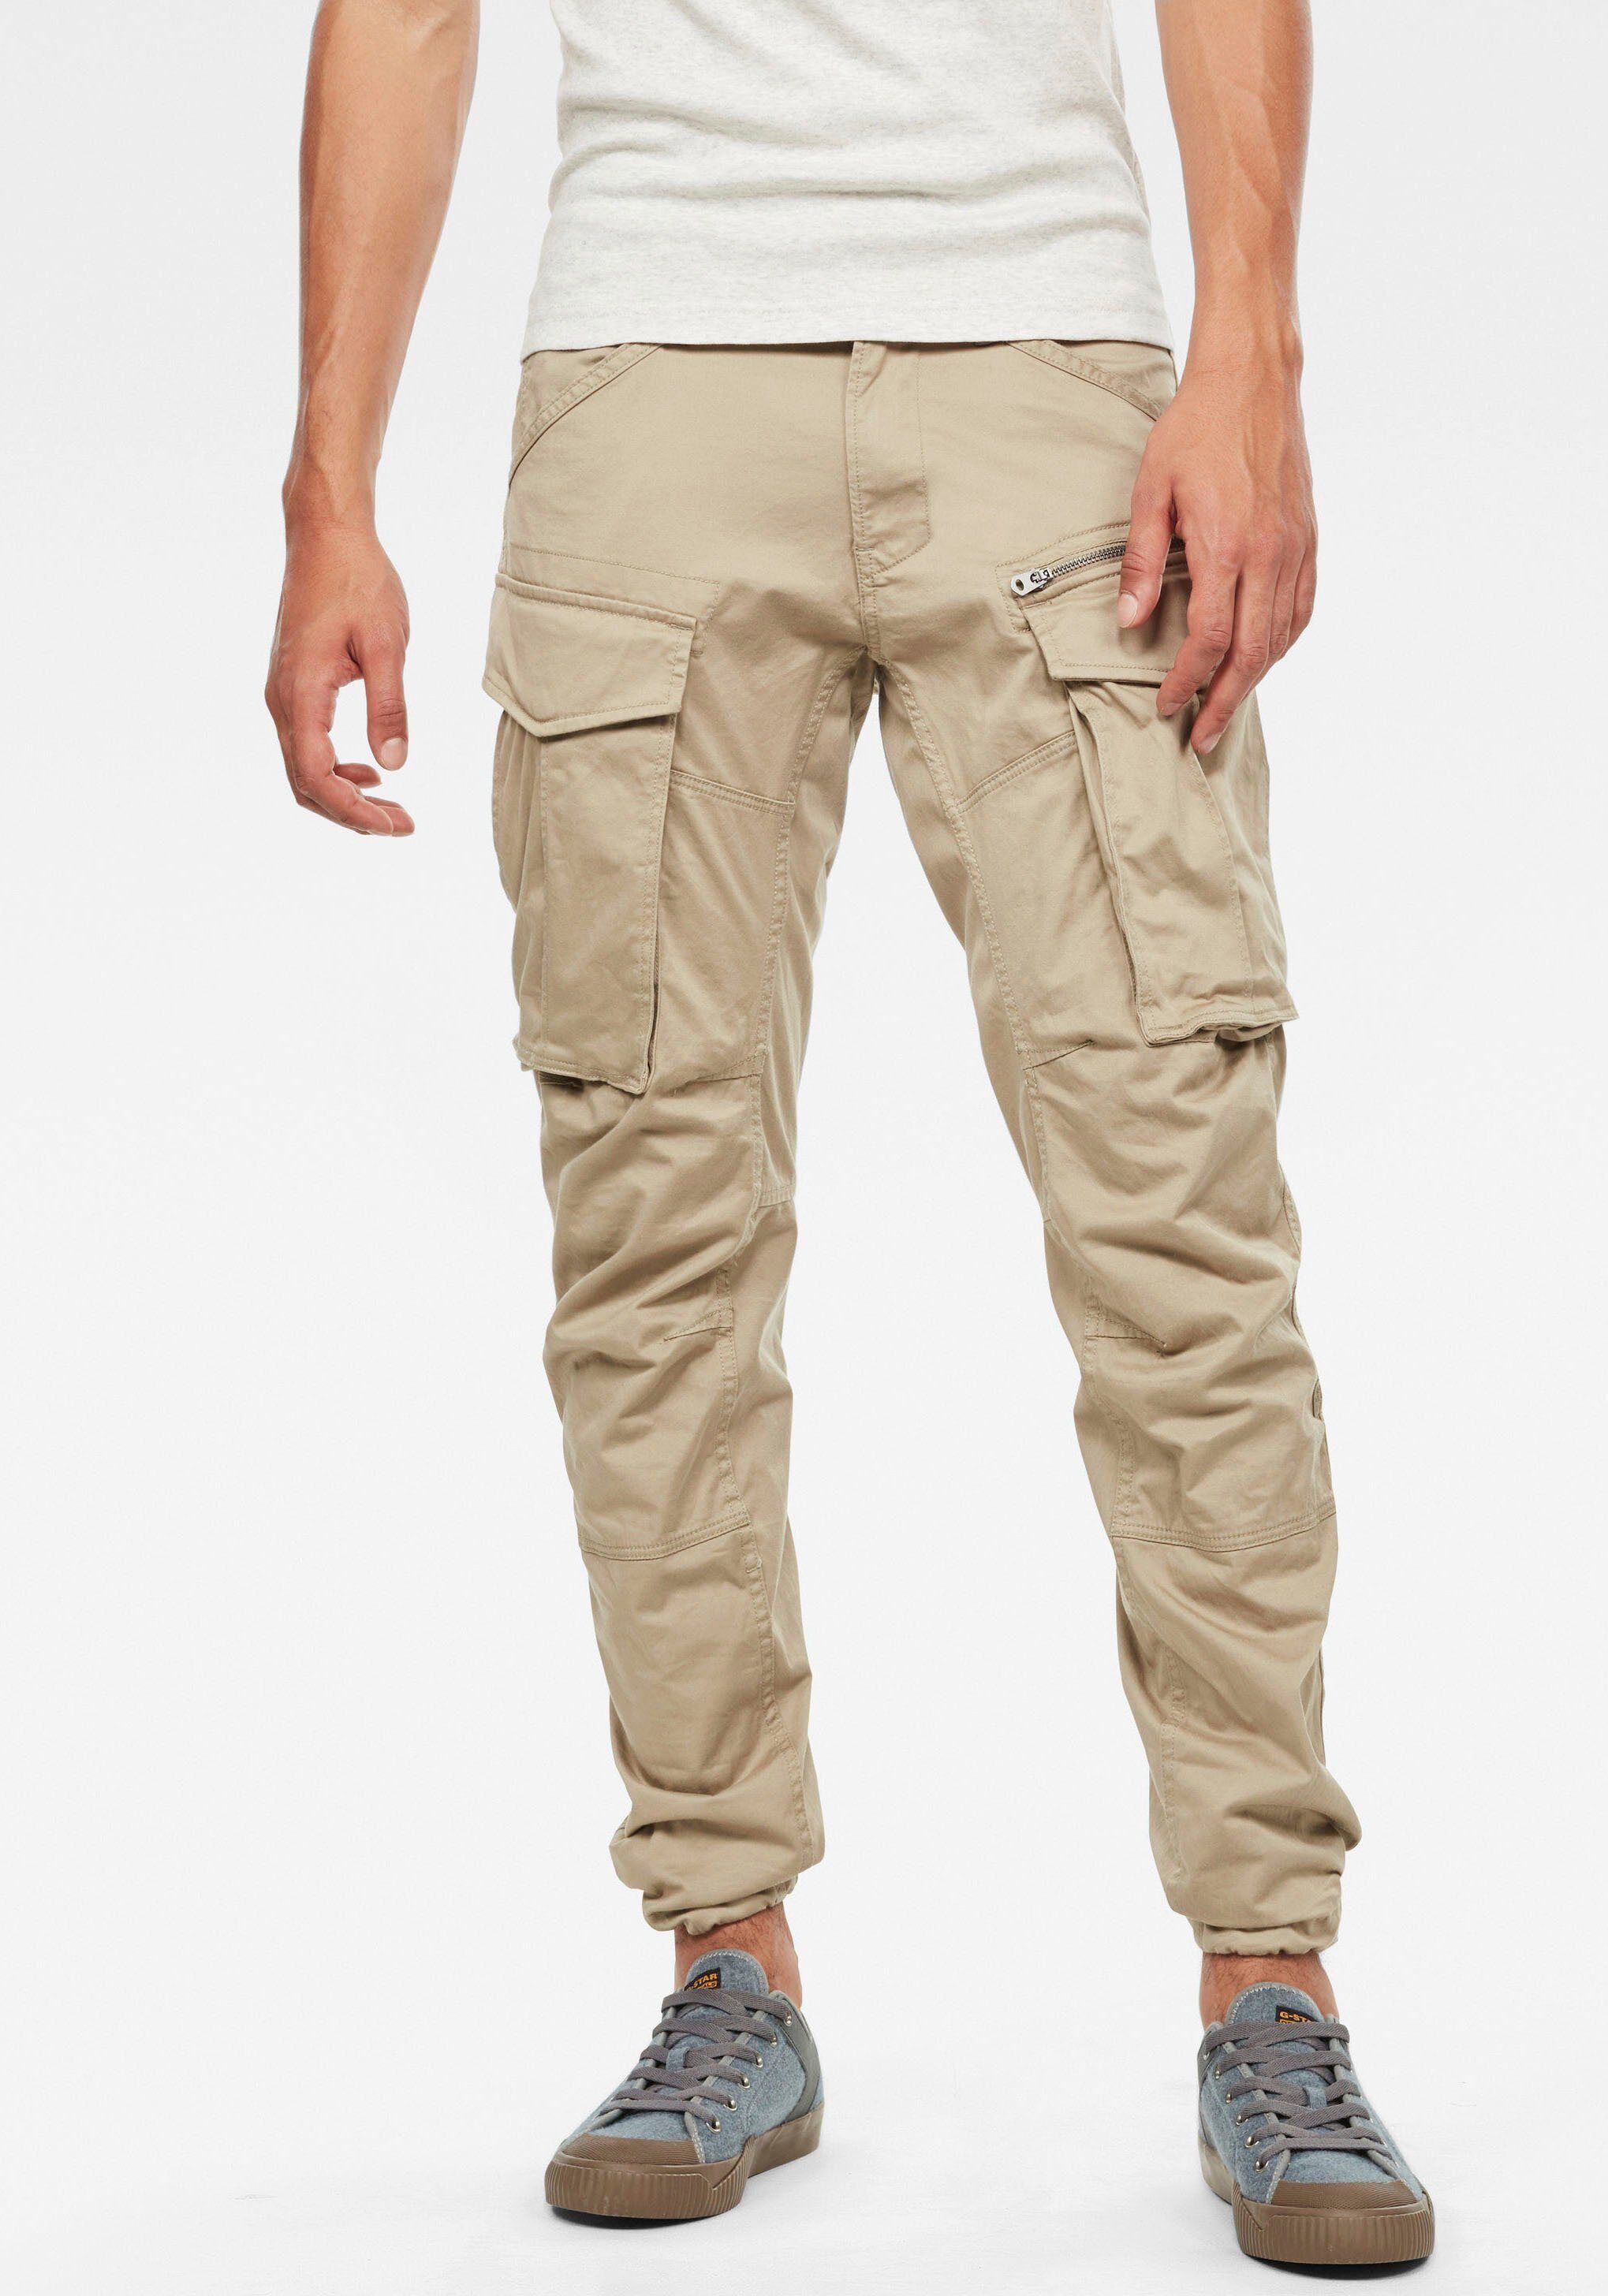 G-Star RAW Cargohose »Rovic Zip 3D Tapered Pant«, beige